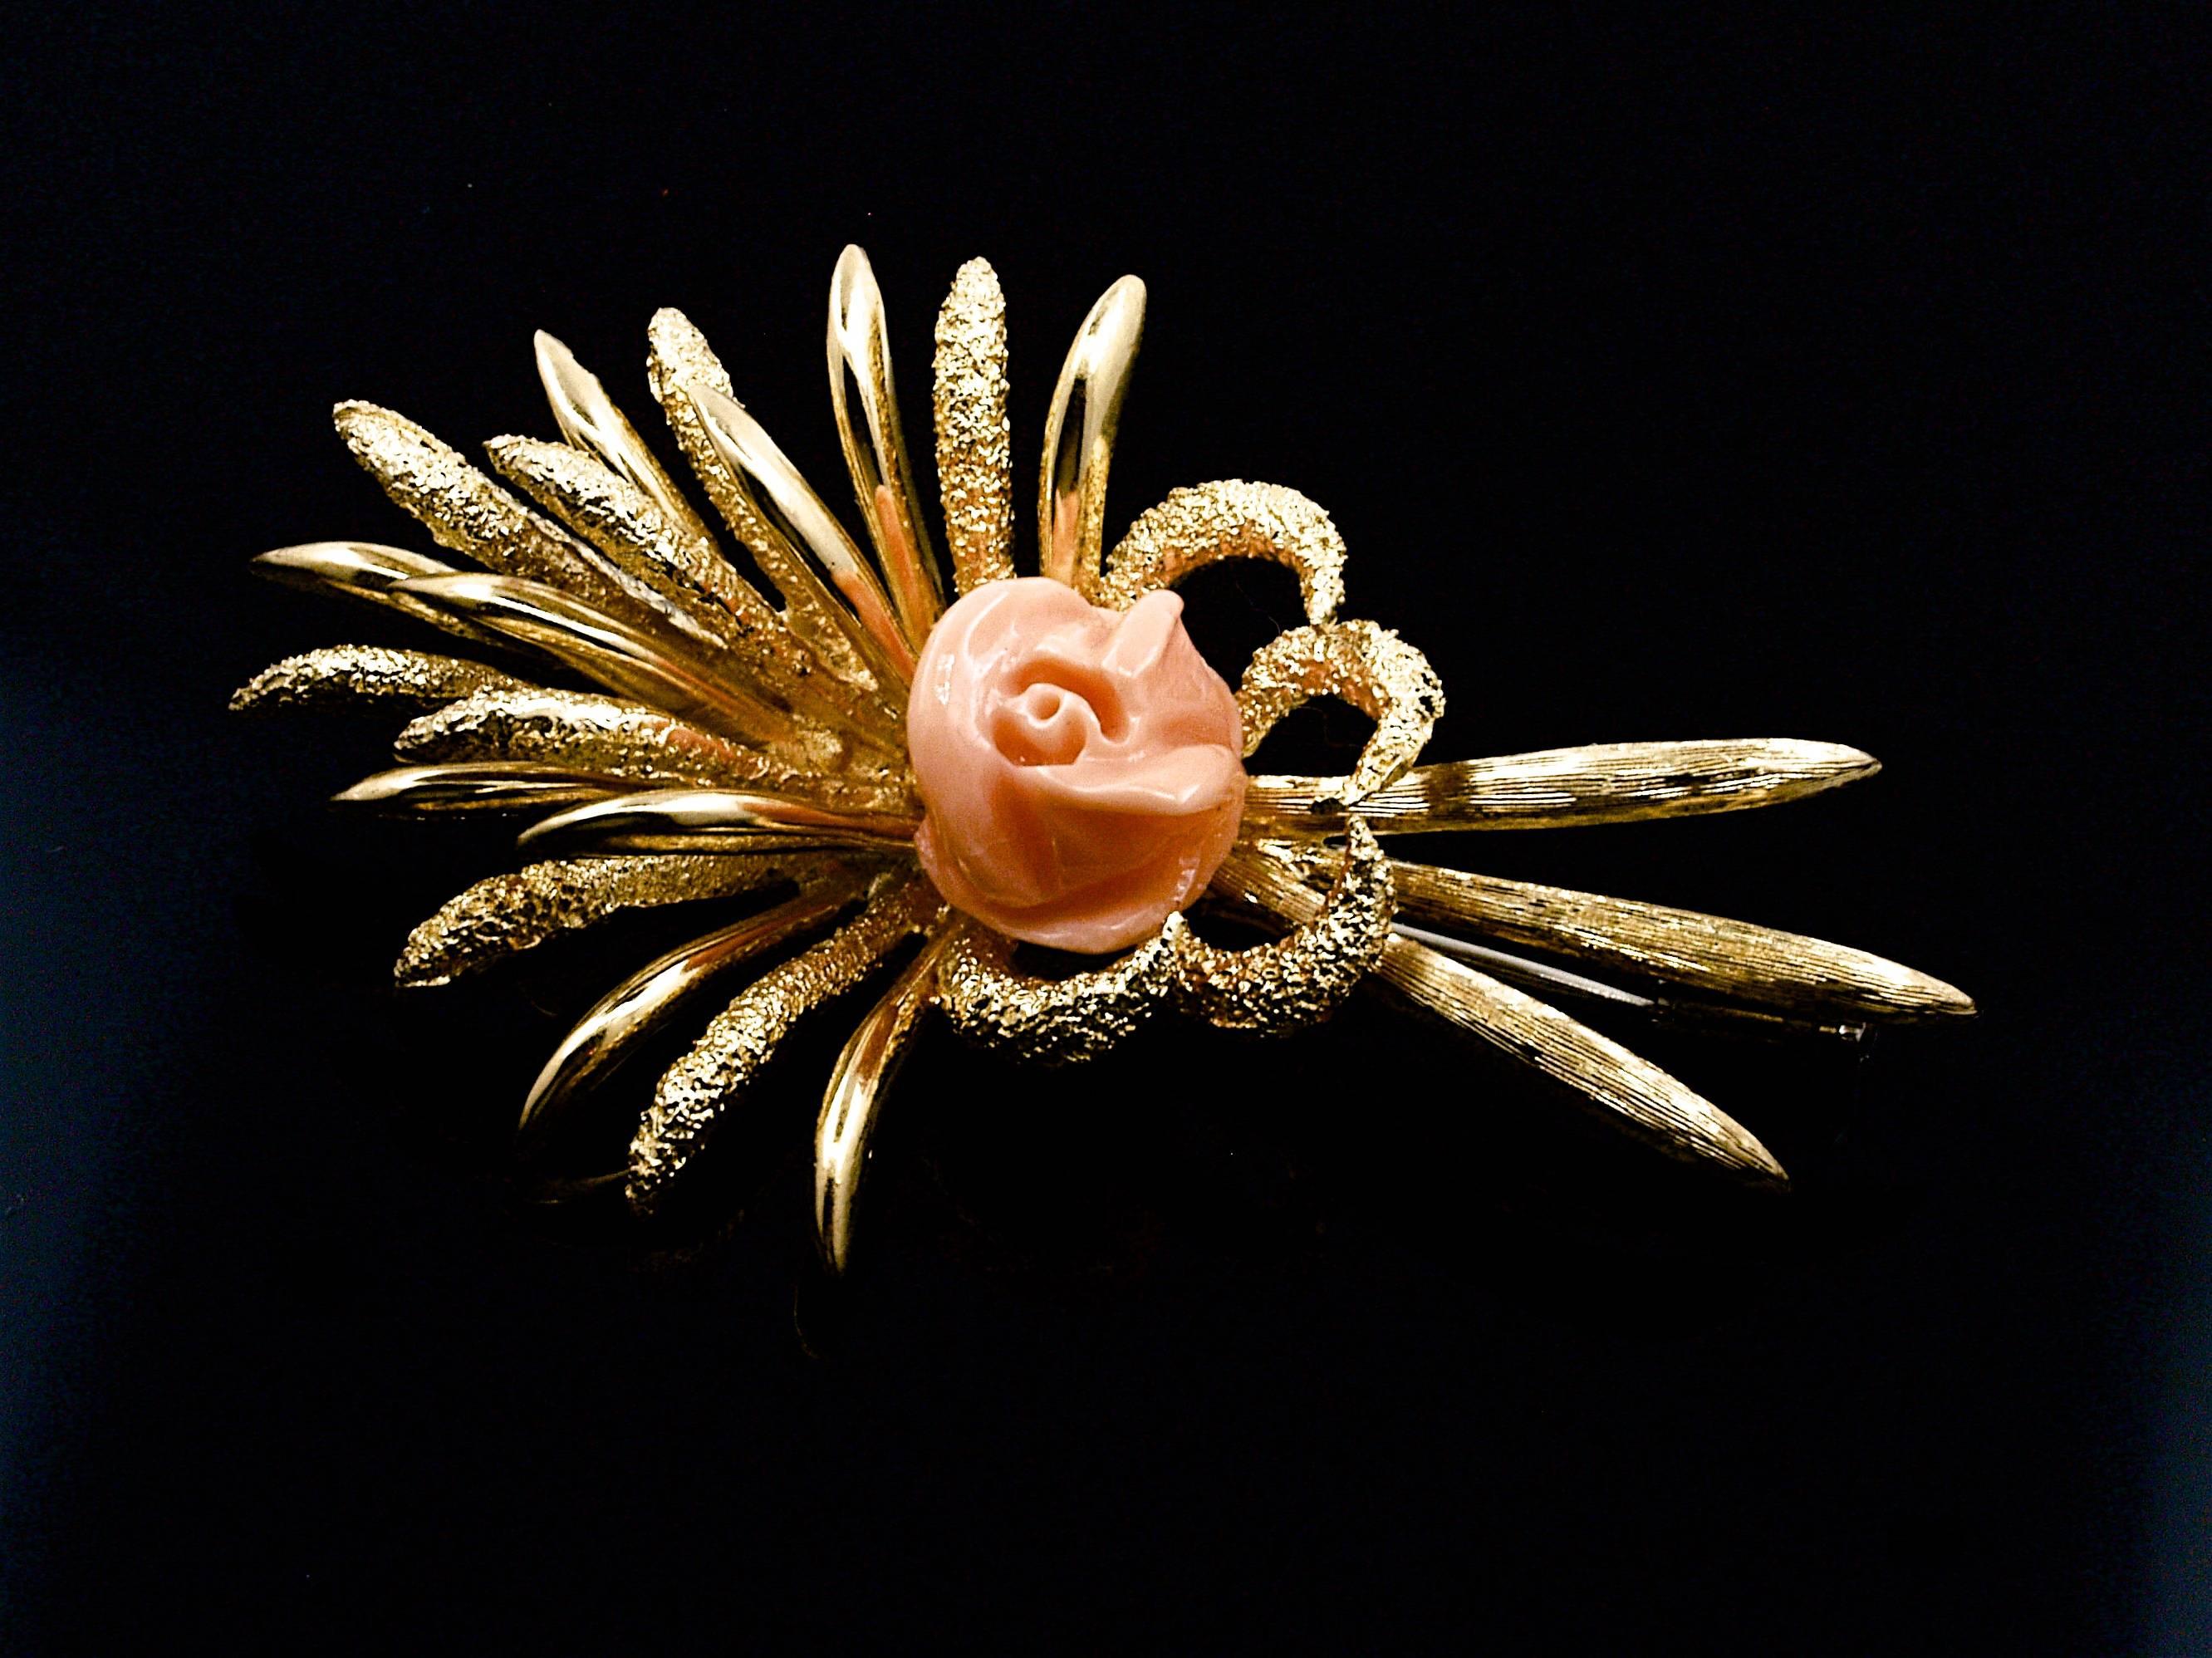 This brooch is from the 1950s, it is 18 karat yellow and is decorated with a salmon colored coral flower.

You can see the detail on this brooch, simply superb, the most beautiful effect !!

Weight is 12.6 grams and its length is 5.5 cm.

Very nice